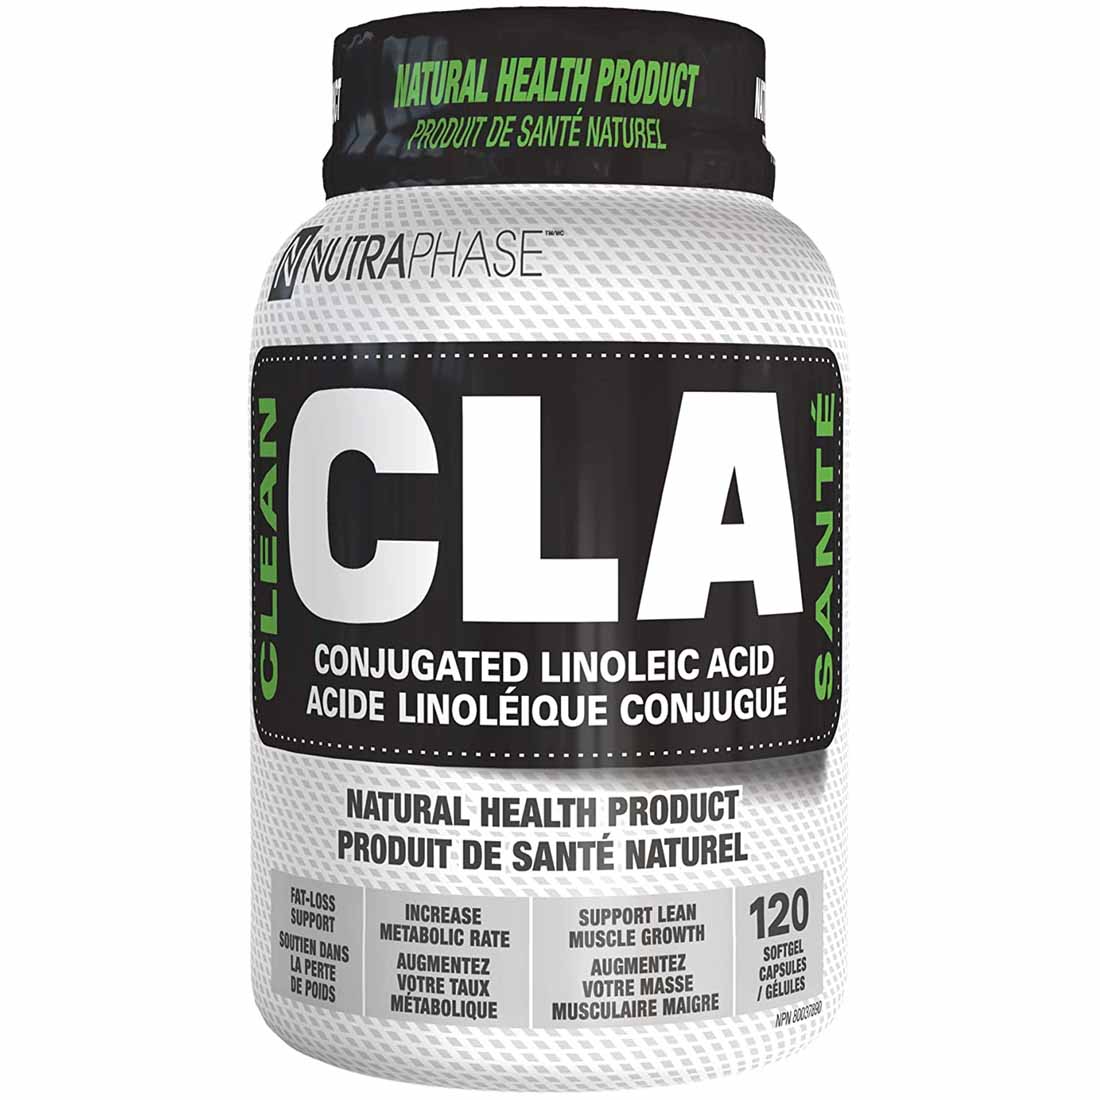 Nutraphase Clean CLA, 120 Capsules